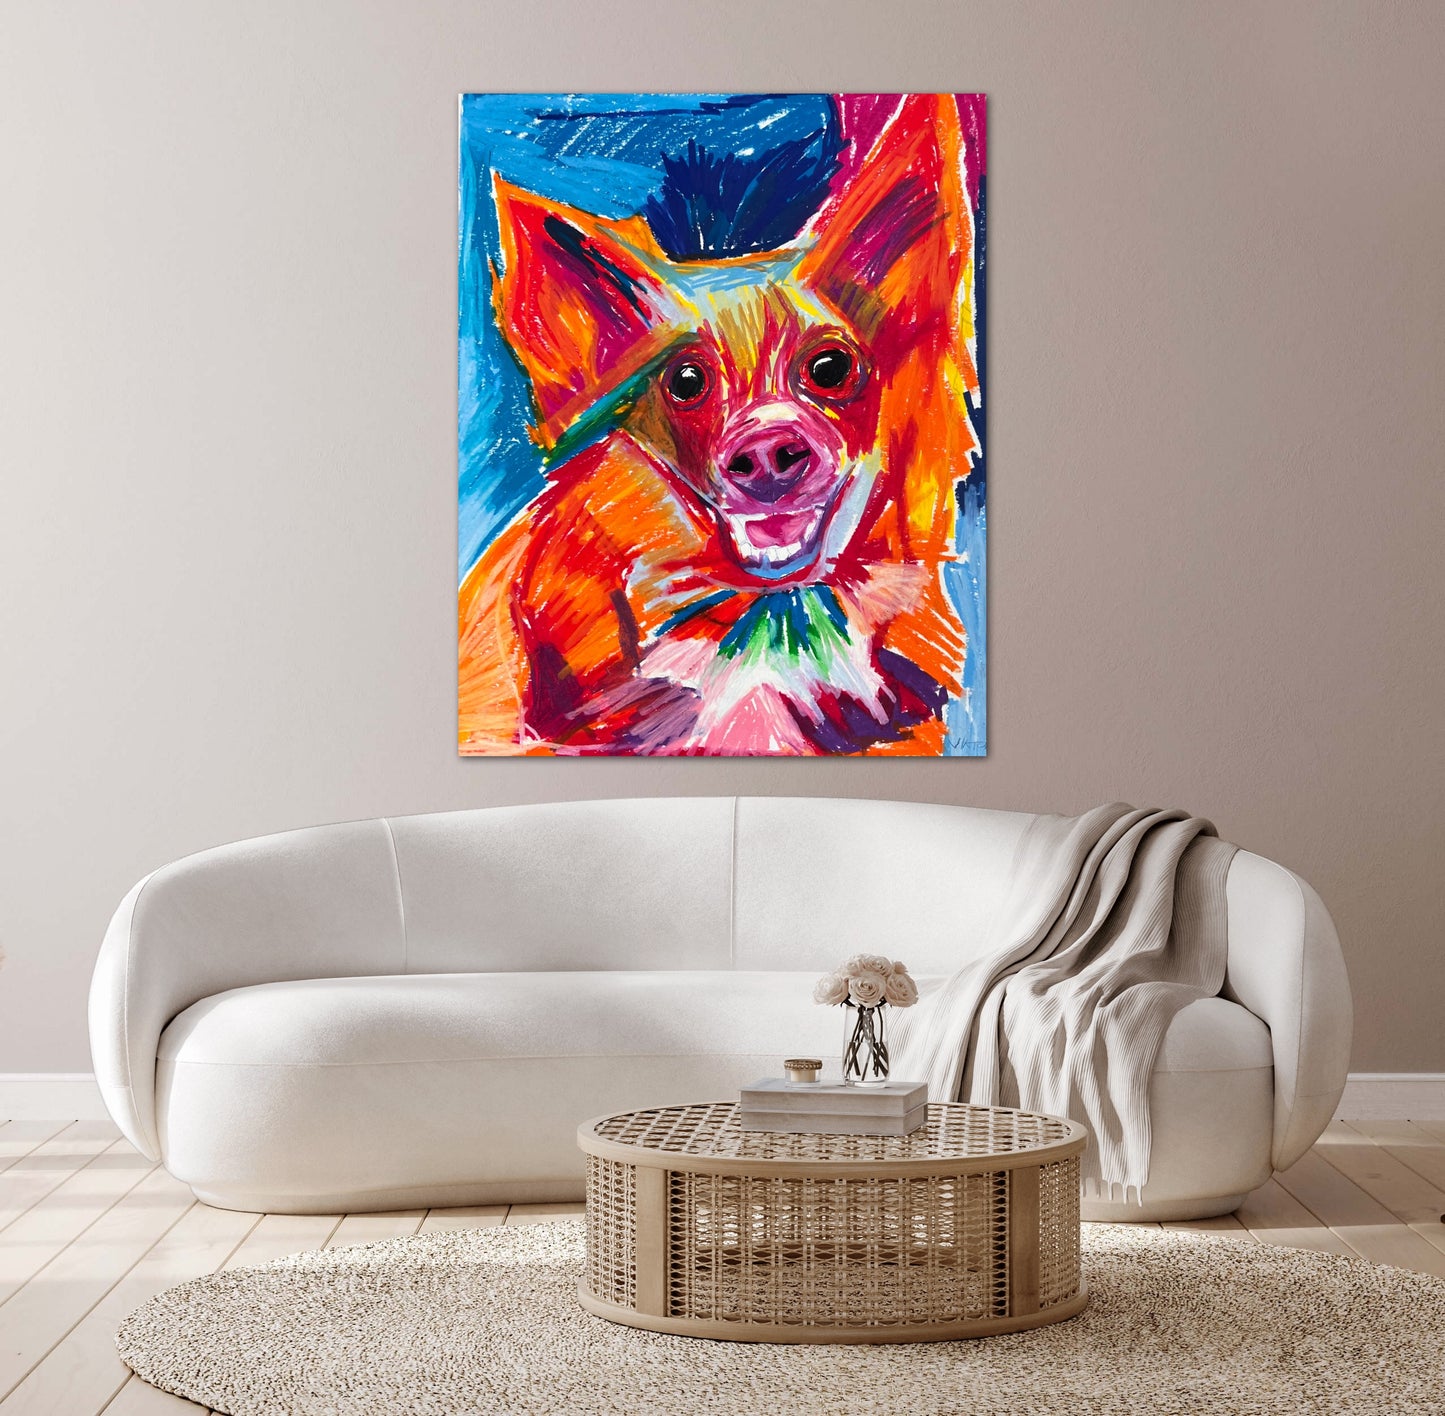 The Red Chihuahua - Print, Poster, Stretched Canvas Print